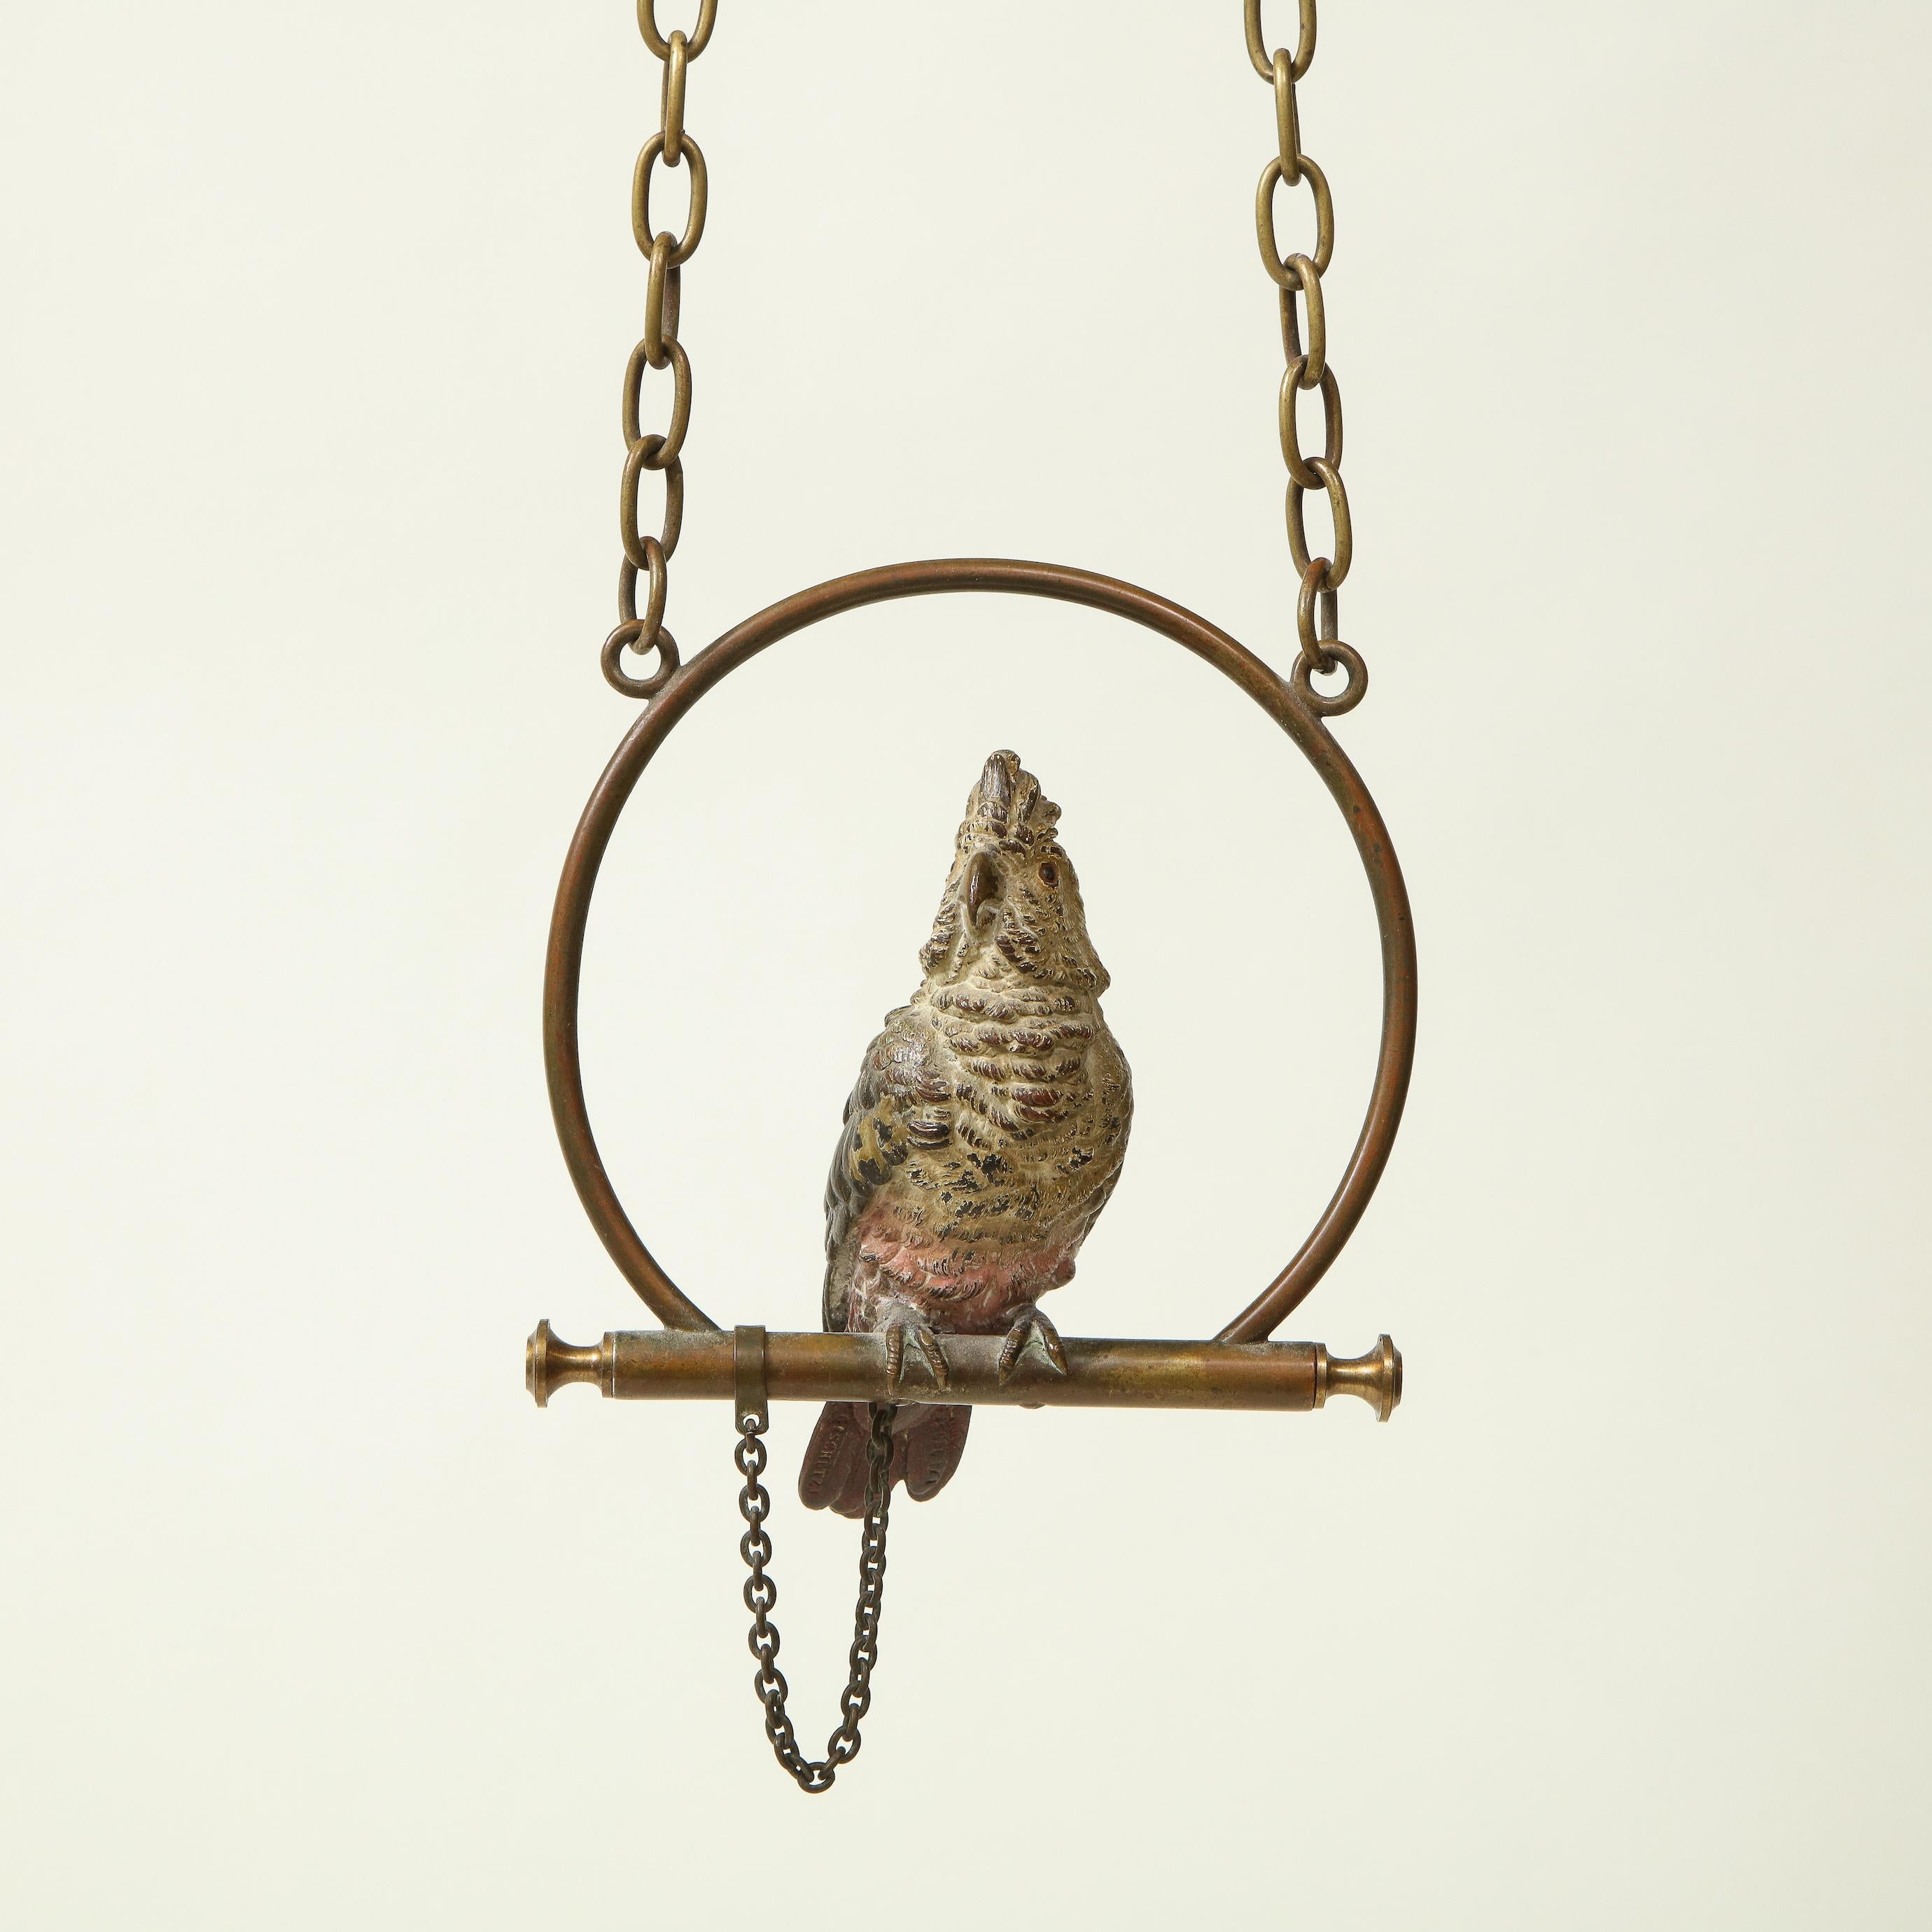 With white, blue, and red plumage; chained to metal perch. 

Provenance: From the Collection of Mario Buatta, New York, NY.